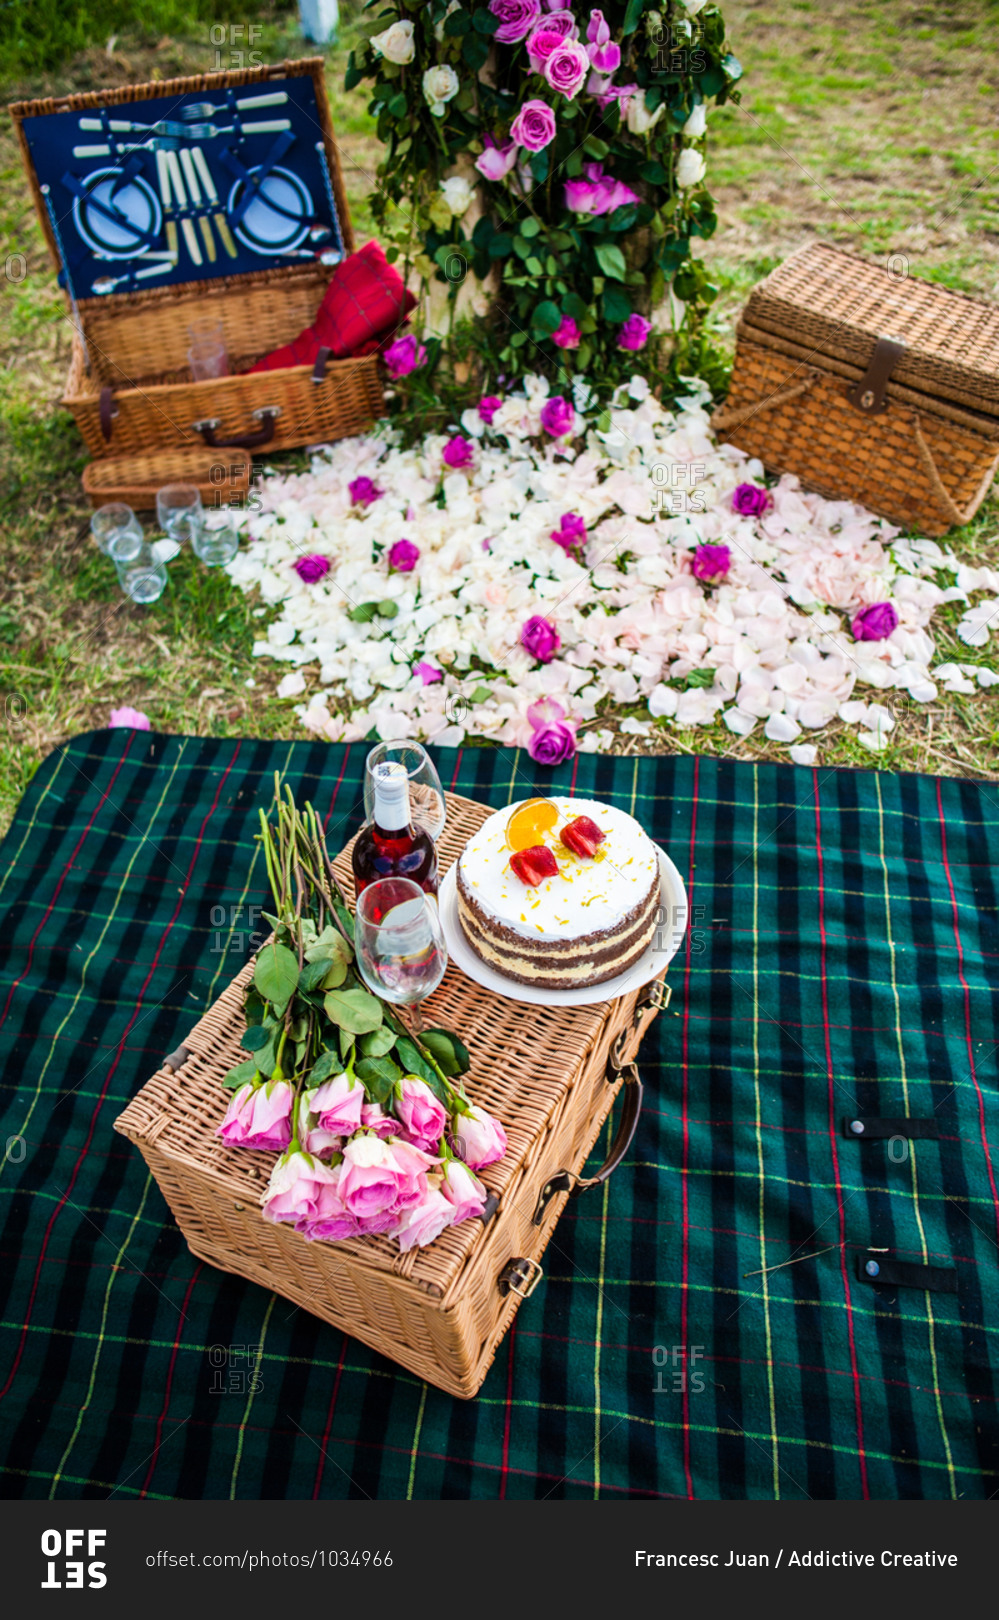 High angle of sweet cake and bottle of wine arranged with wineglasses and bouquet of flowers on wicker basket on green lawn for summer picnic